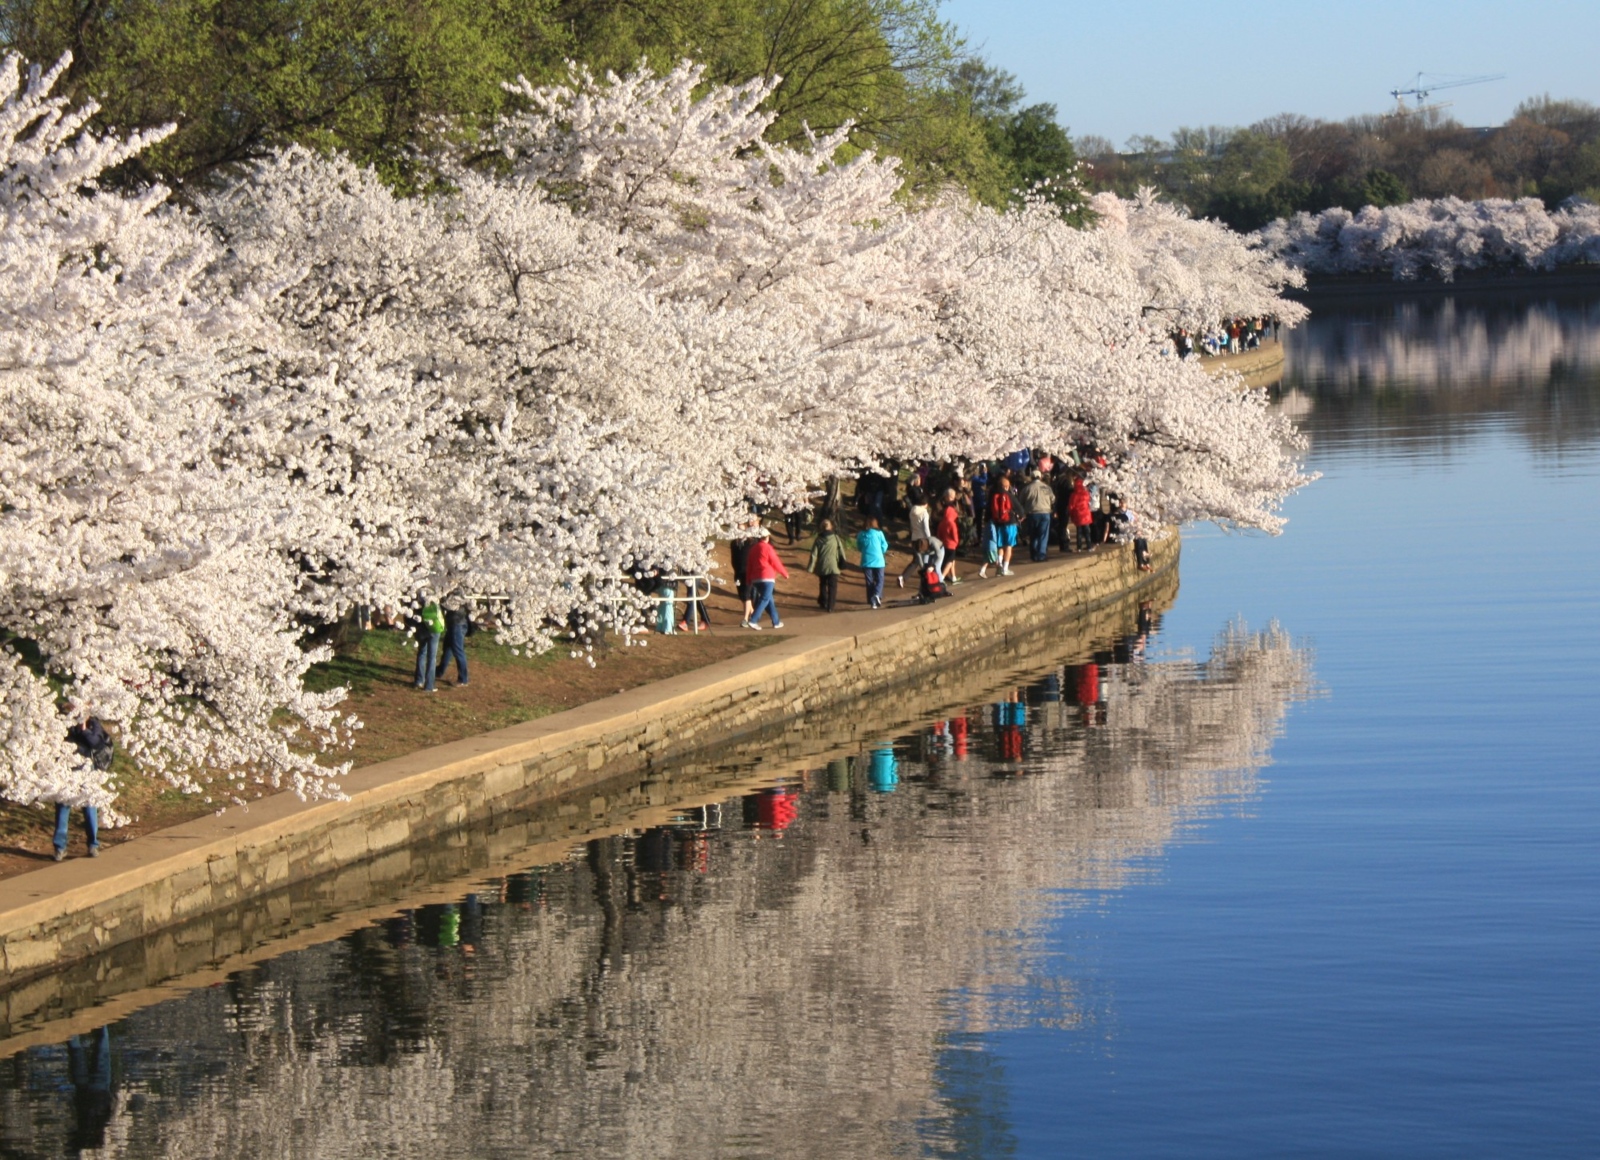 Cherry blossom time in Washington D.C. reveals a warming planet